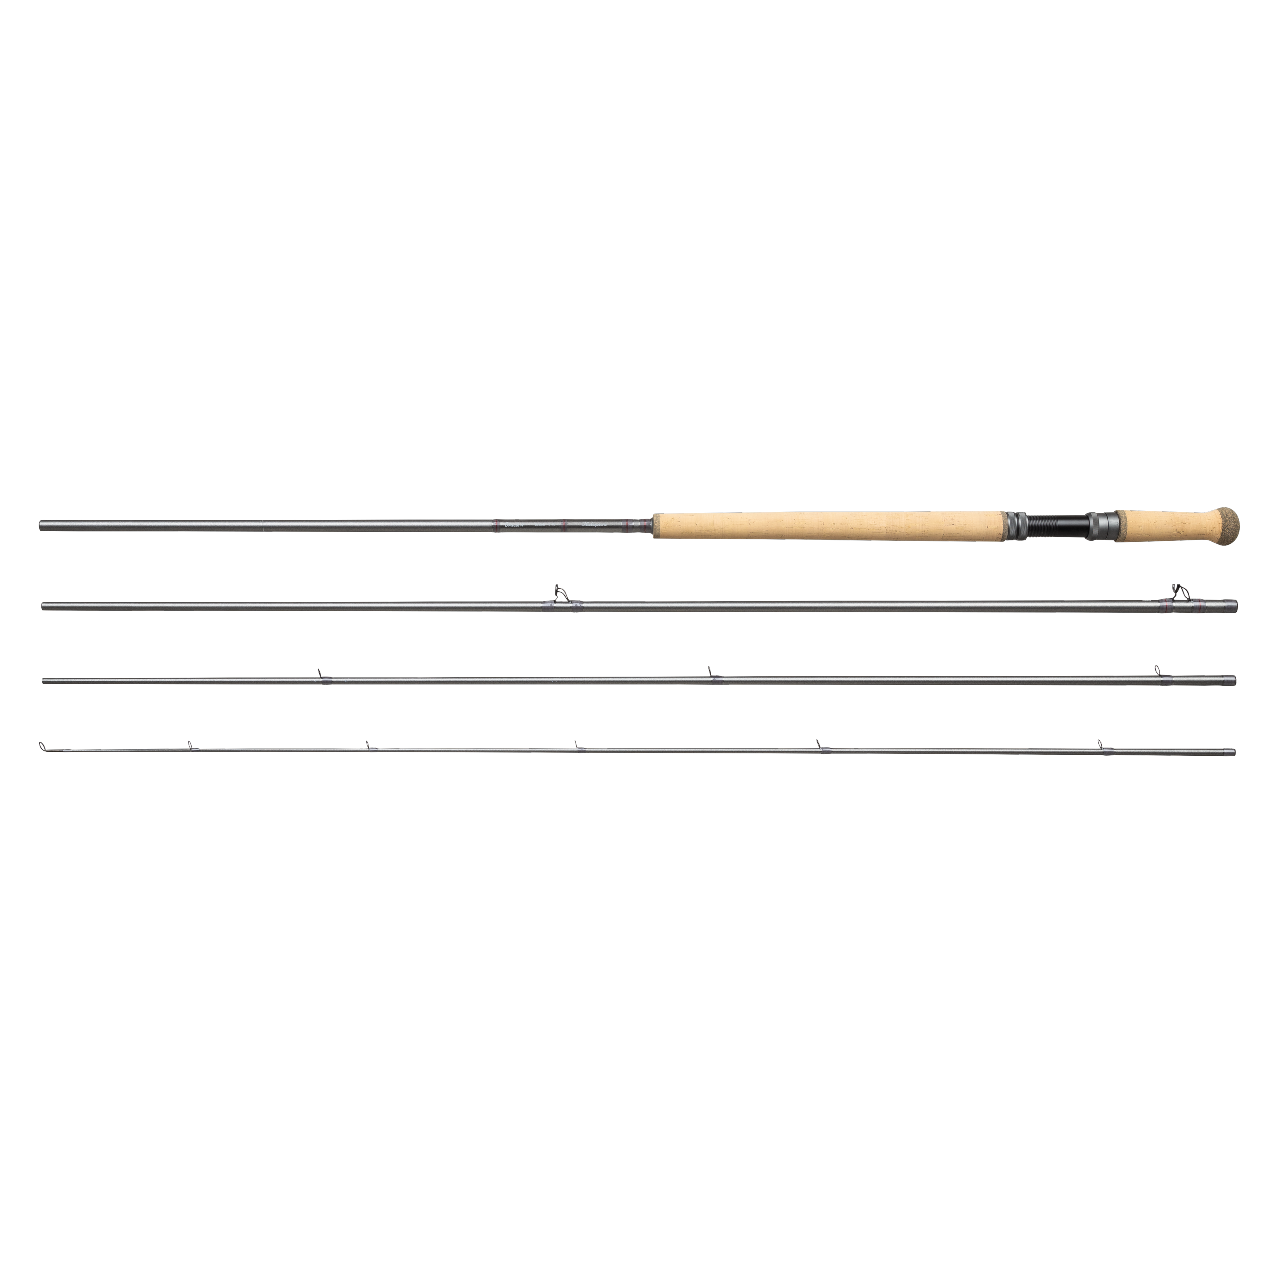 Shakespeare New Oracle 2 Spey Salmon Fly Fishing Rods - All Models